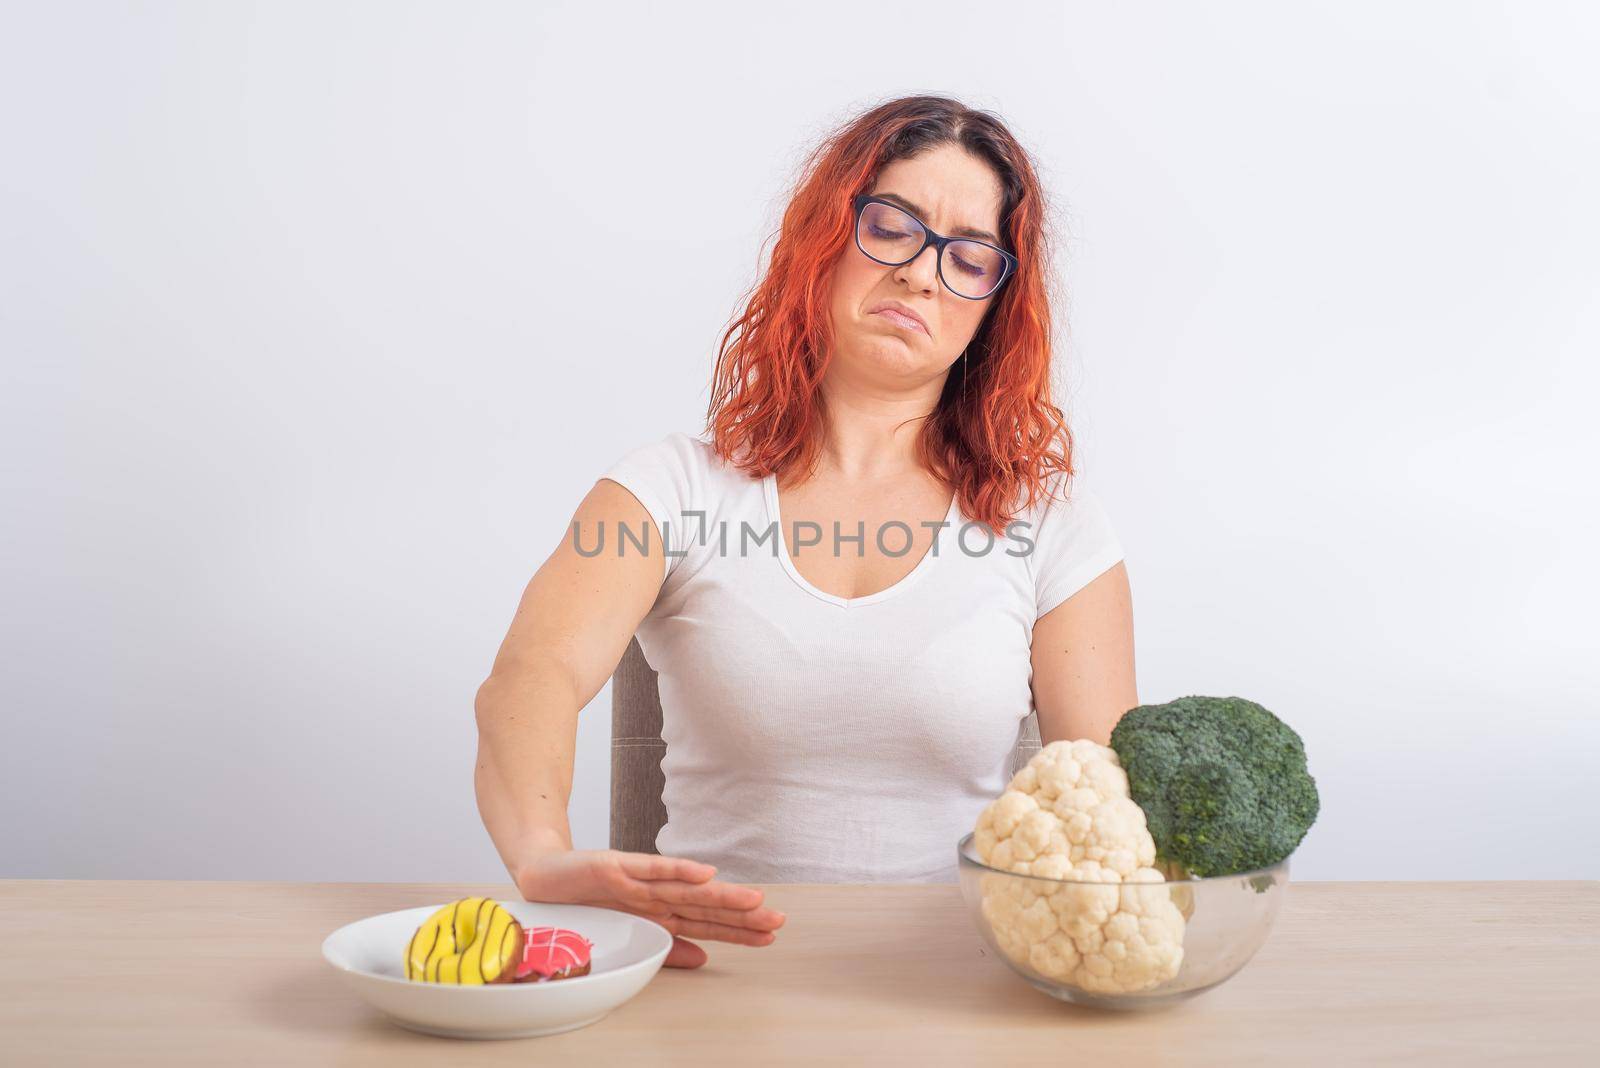 Caucasian woman prefers healthy food and refuses fast food. Redhead girl chooses between broccoli and donuts on white background by mrwed54